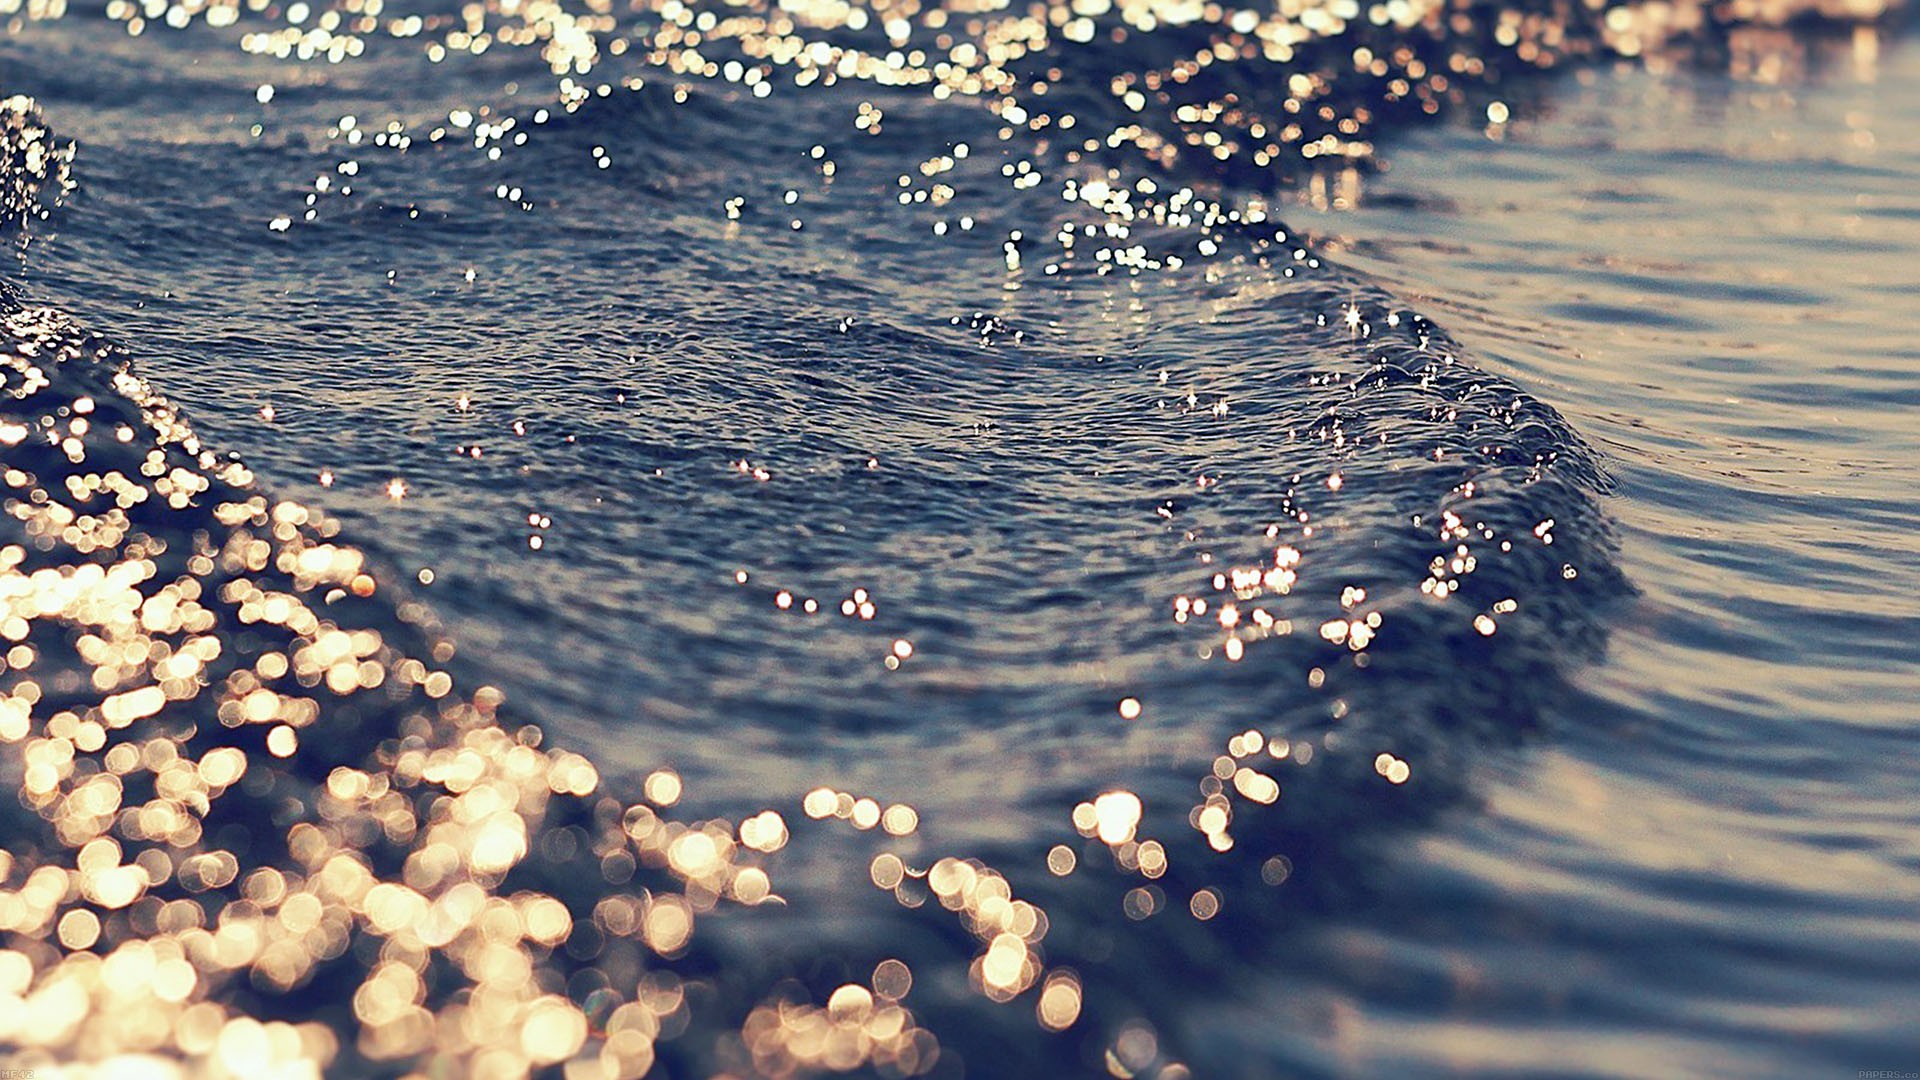 General 1920x1080 water sea gold blue nature outdoors